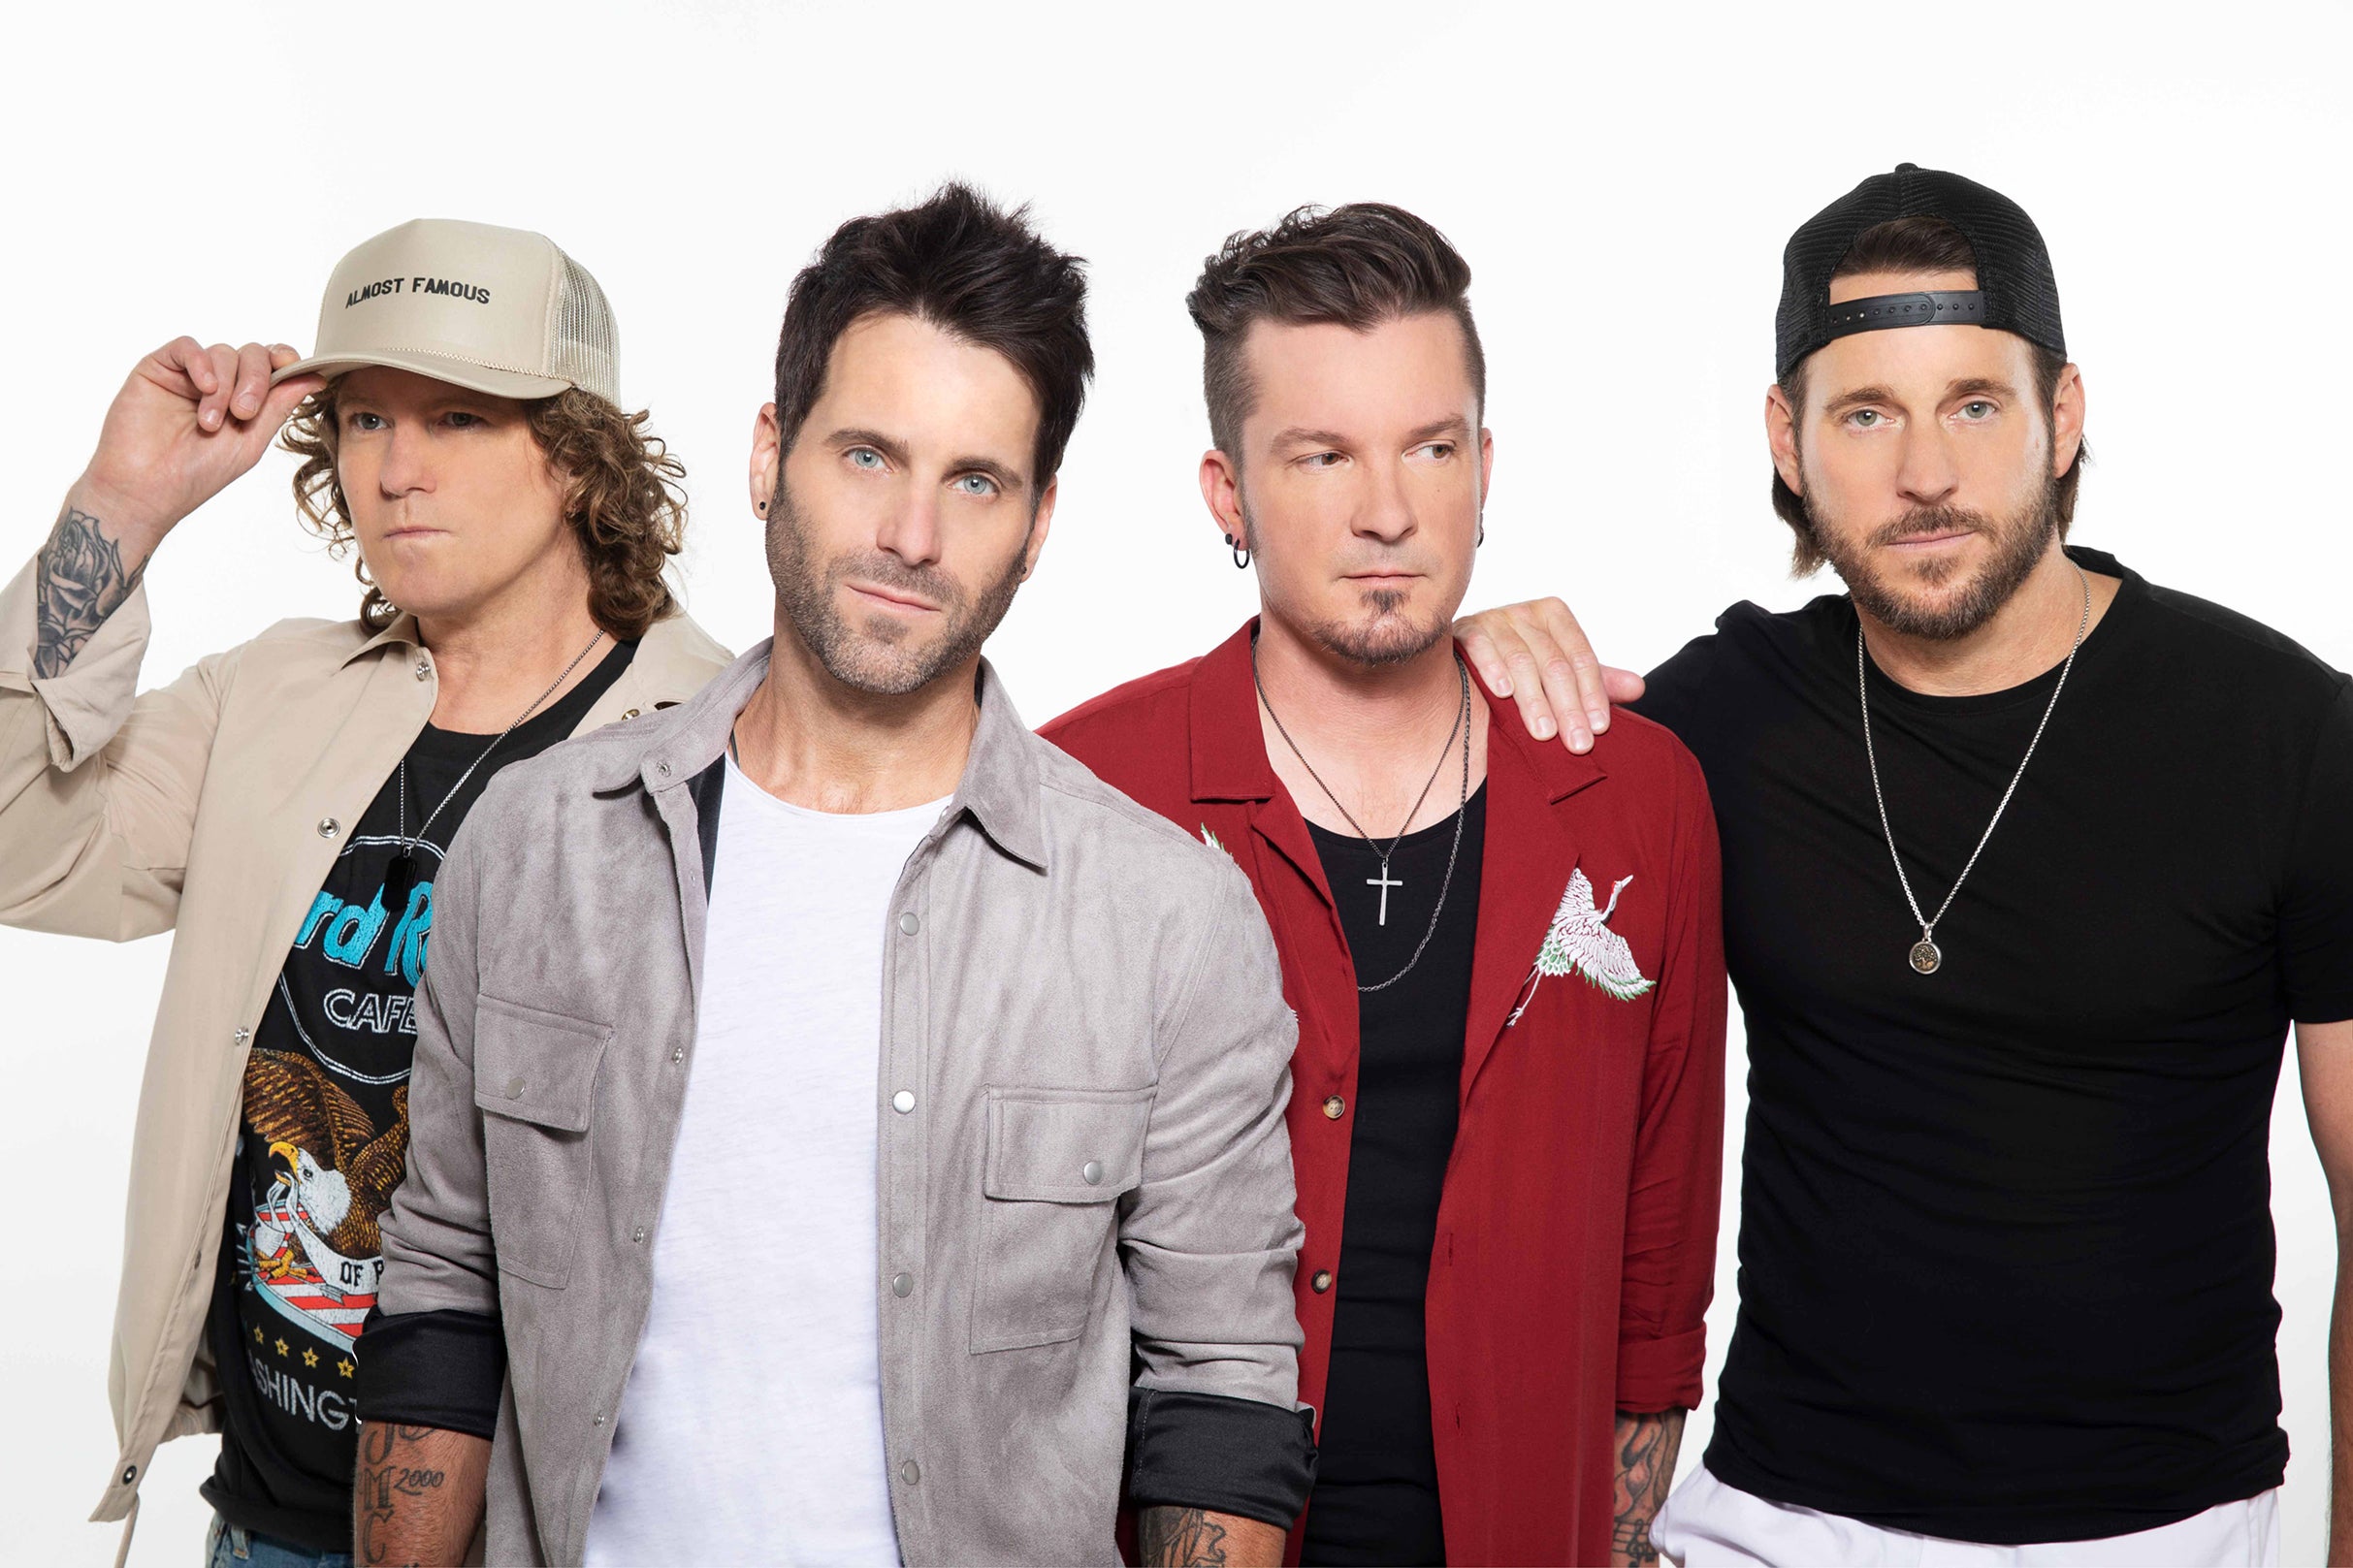 Parmalee in Puyallup promo photo for Fair Concert Subscribers presale offer code